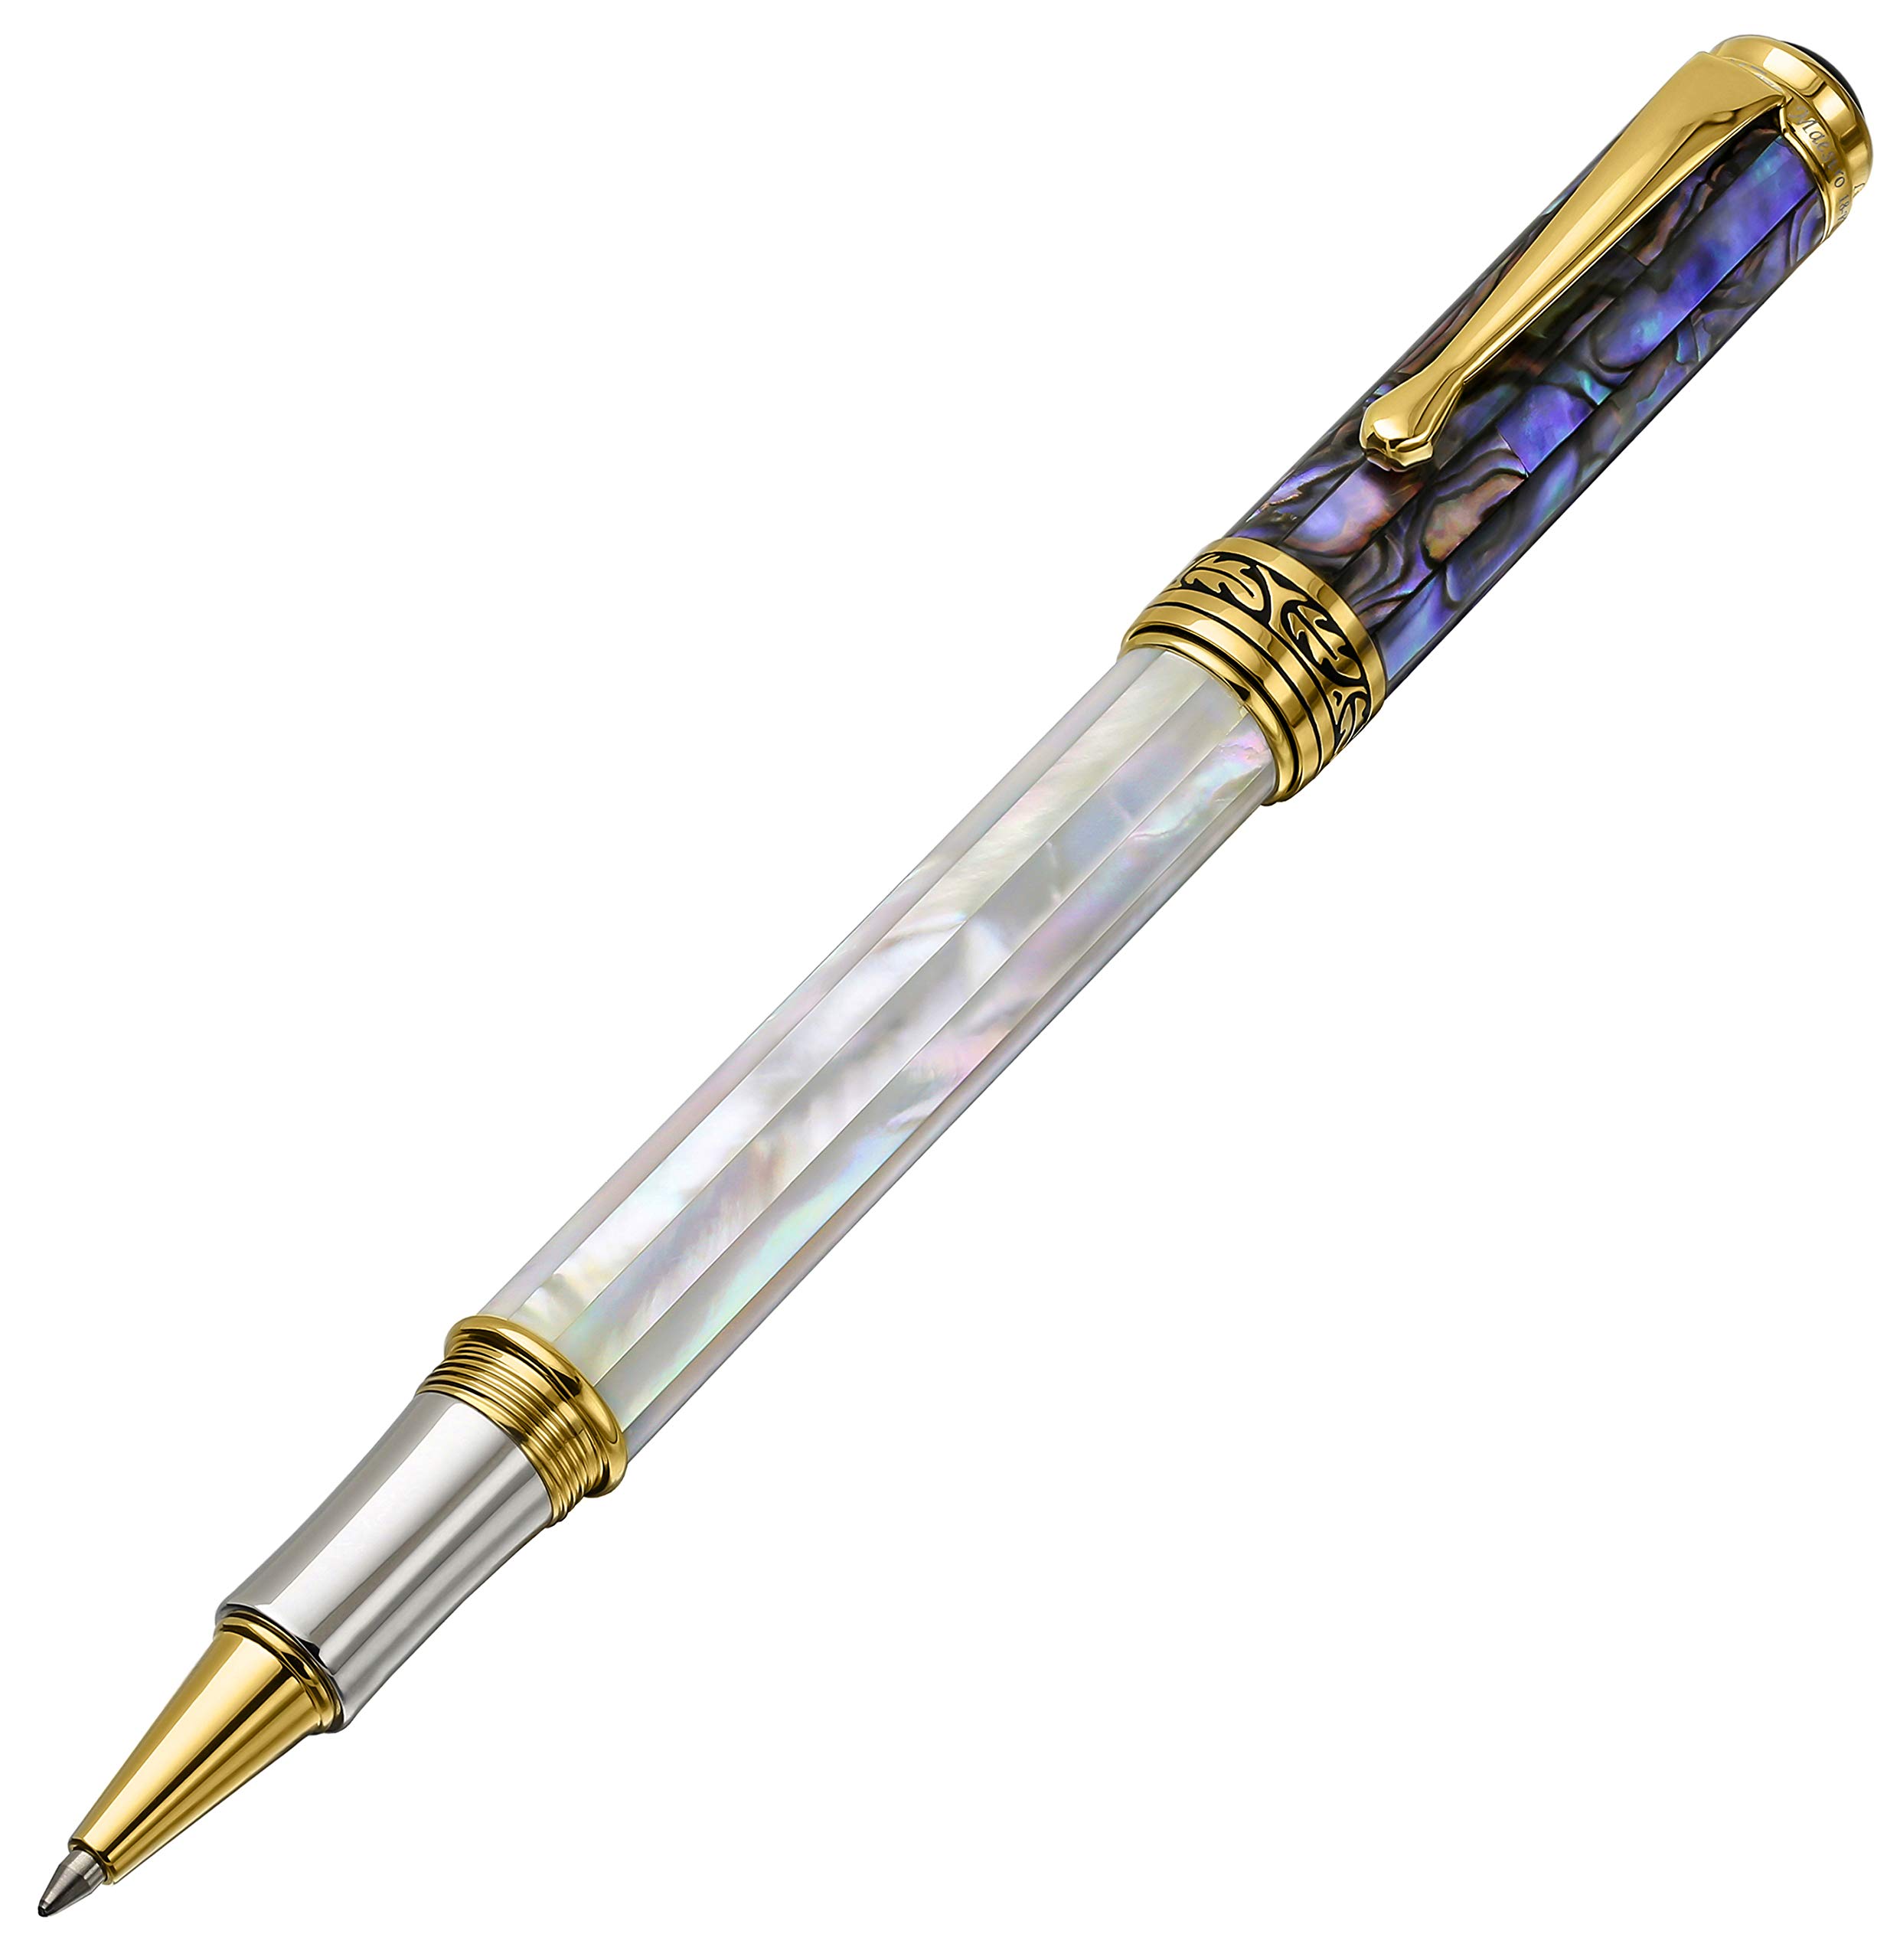 Xezo Maestro Handmade from Oceanic Origin White Mother of Pearl and Paua Sea Shell Serialized Fine Rollerball Pen. 18K Gold, Platinum Plated. No Tw...